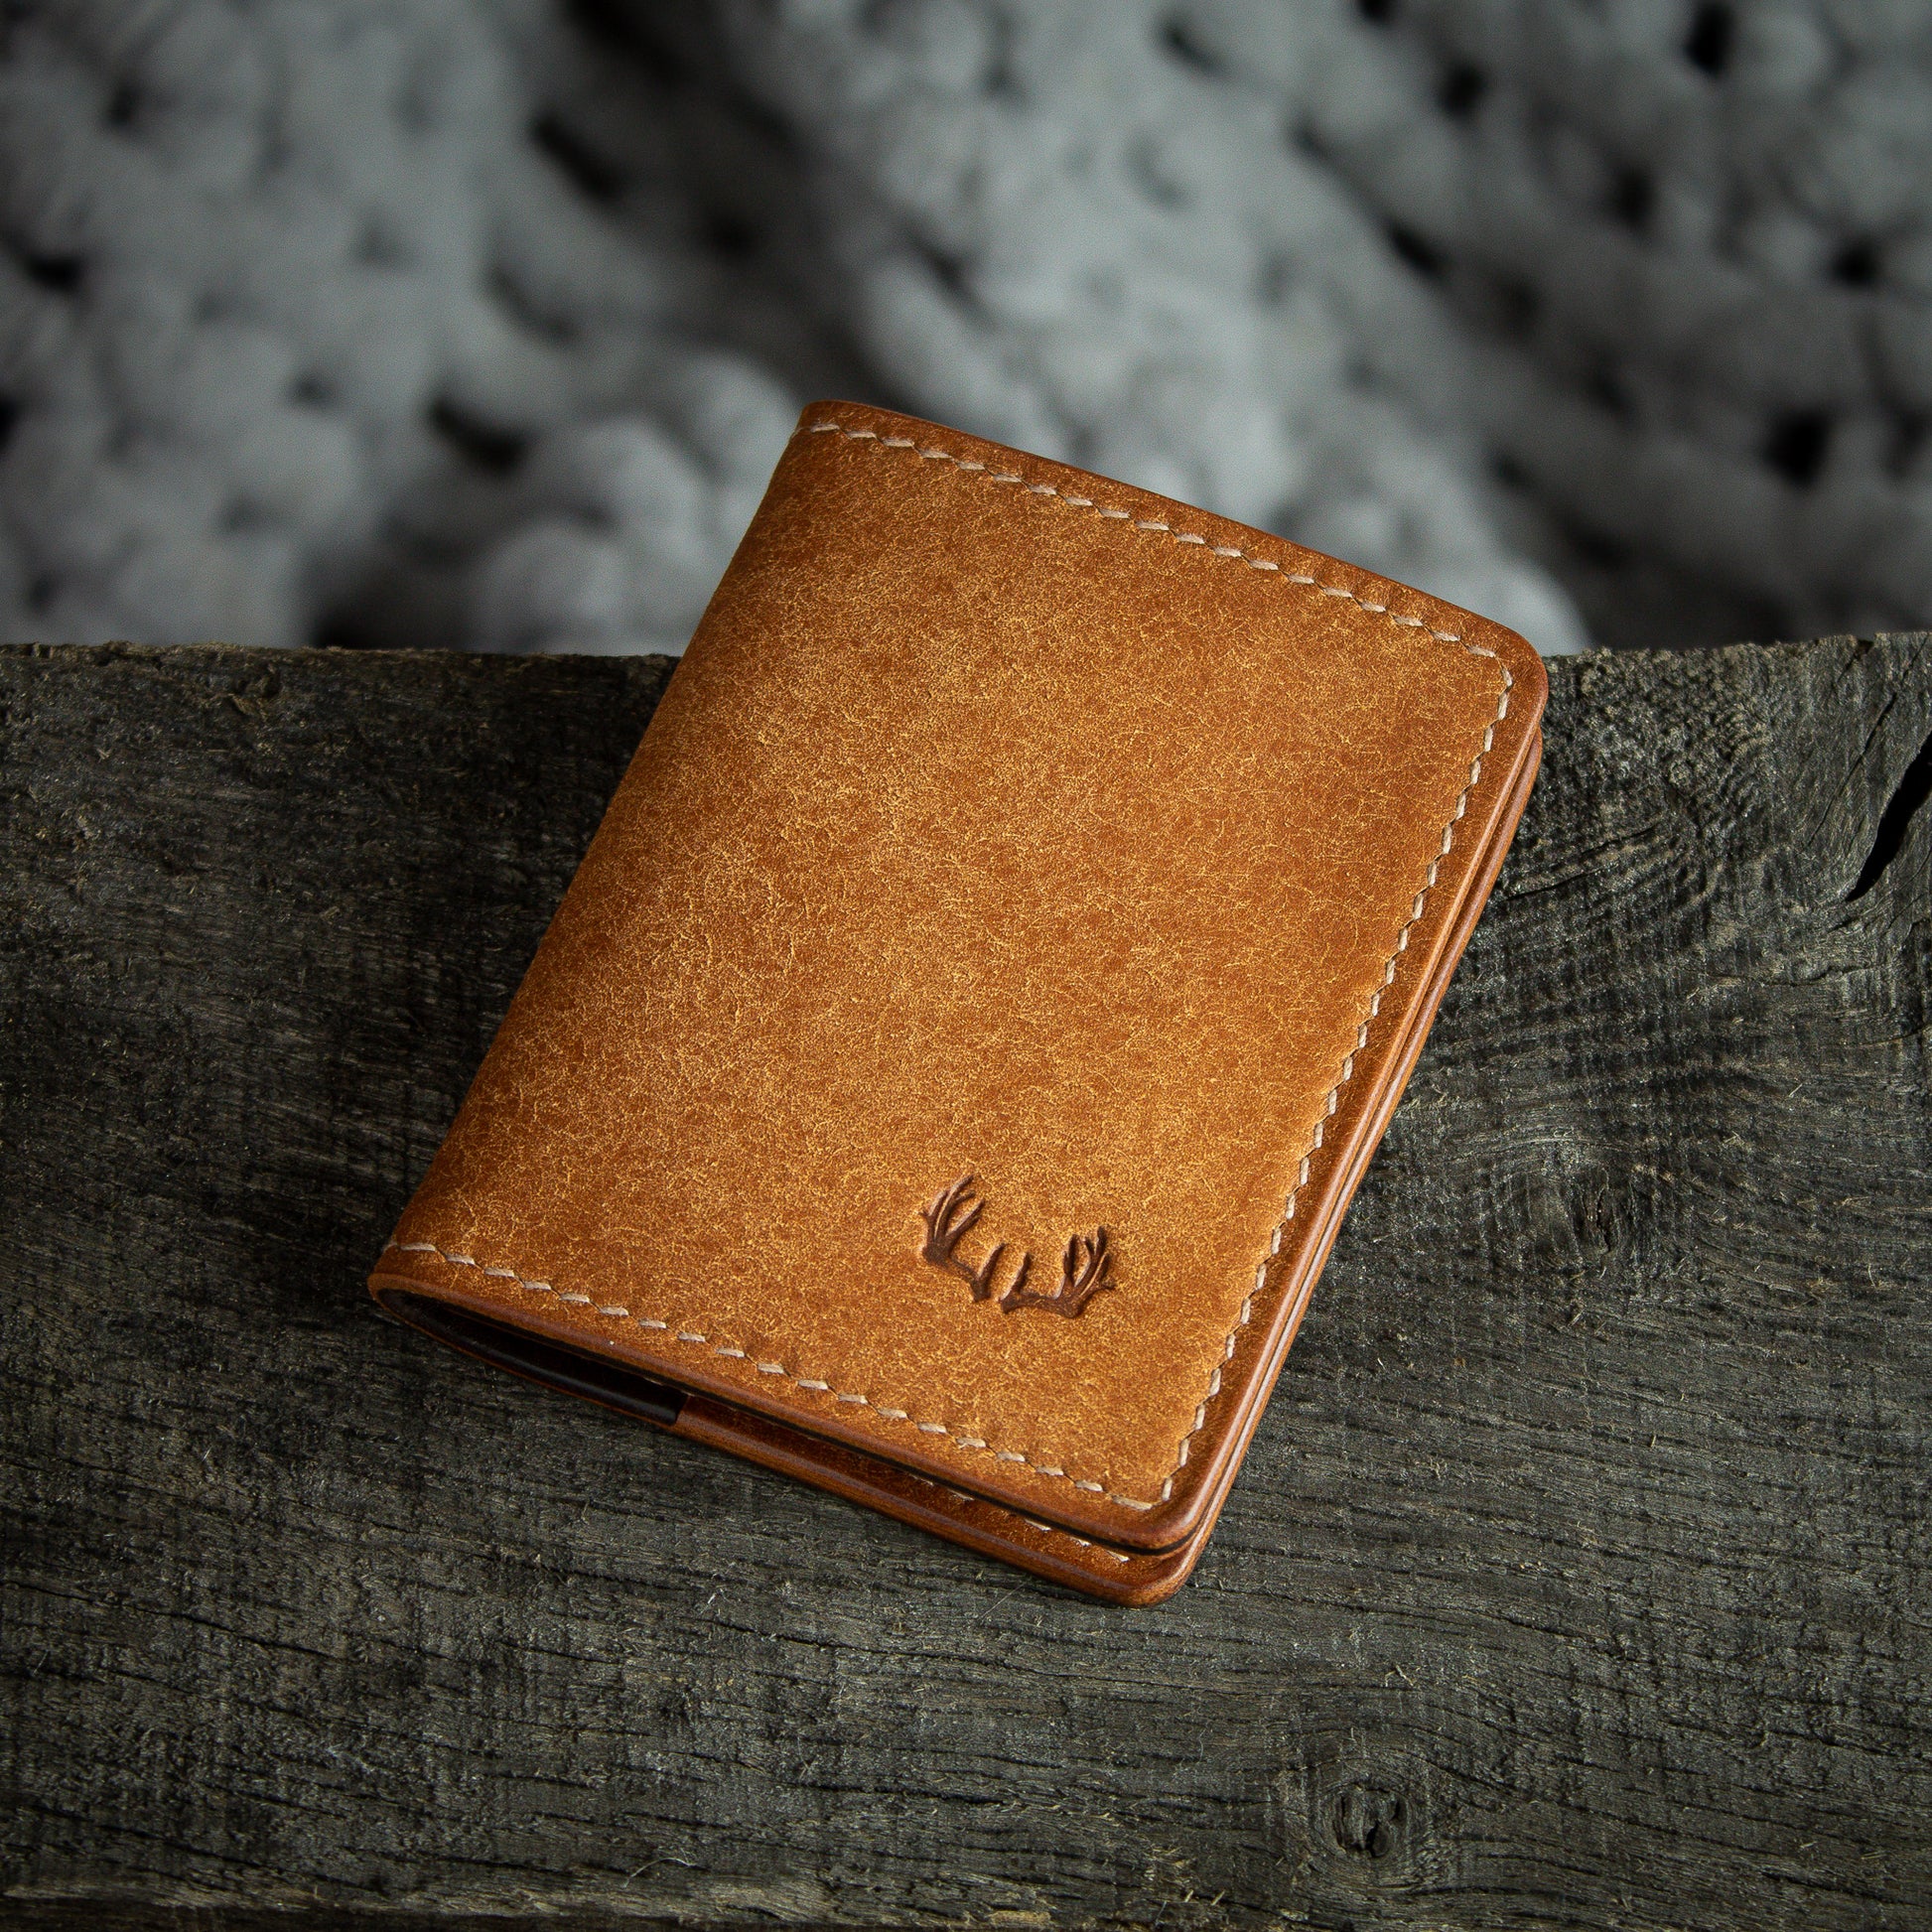 Elkwood Leather - The Cedar - Bi-fold full grain Italian Pueblo leather cardholder wallet closed front with small antler horn logo onto of rugged wood